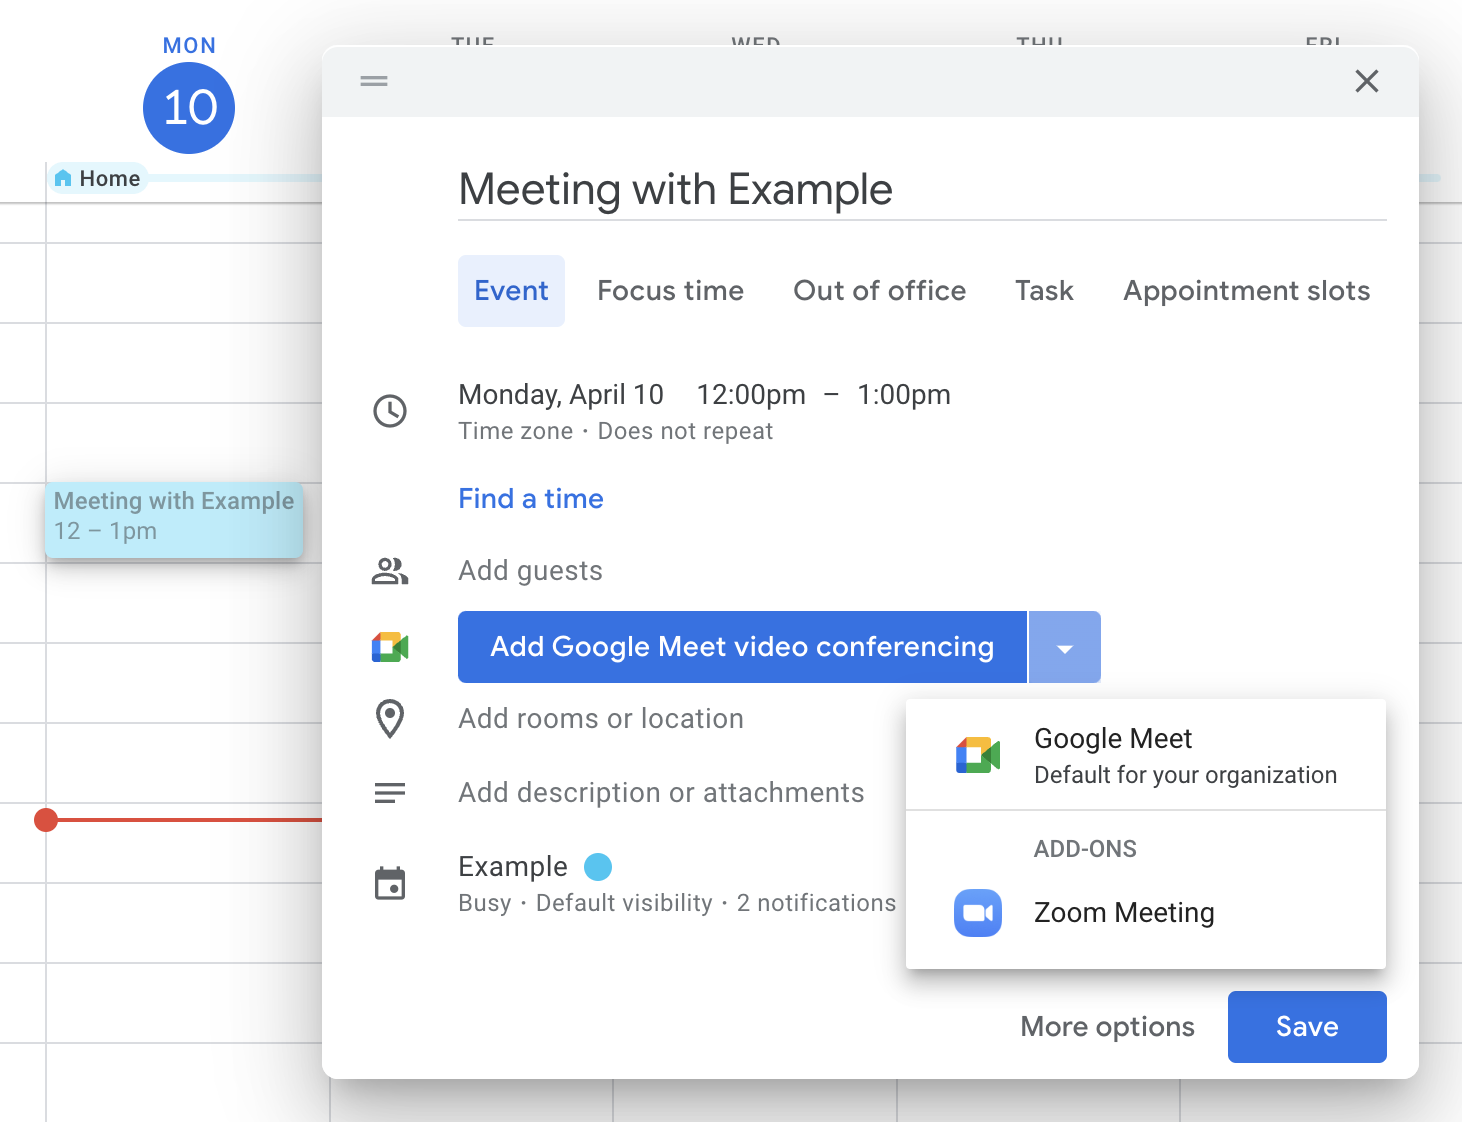 Navigate to the Add Video Conferencing pop-up button. Activate the button and select Zoom Meeting.